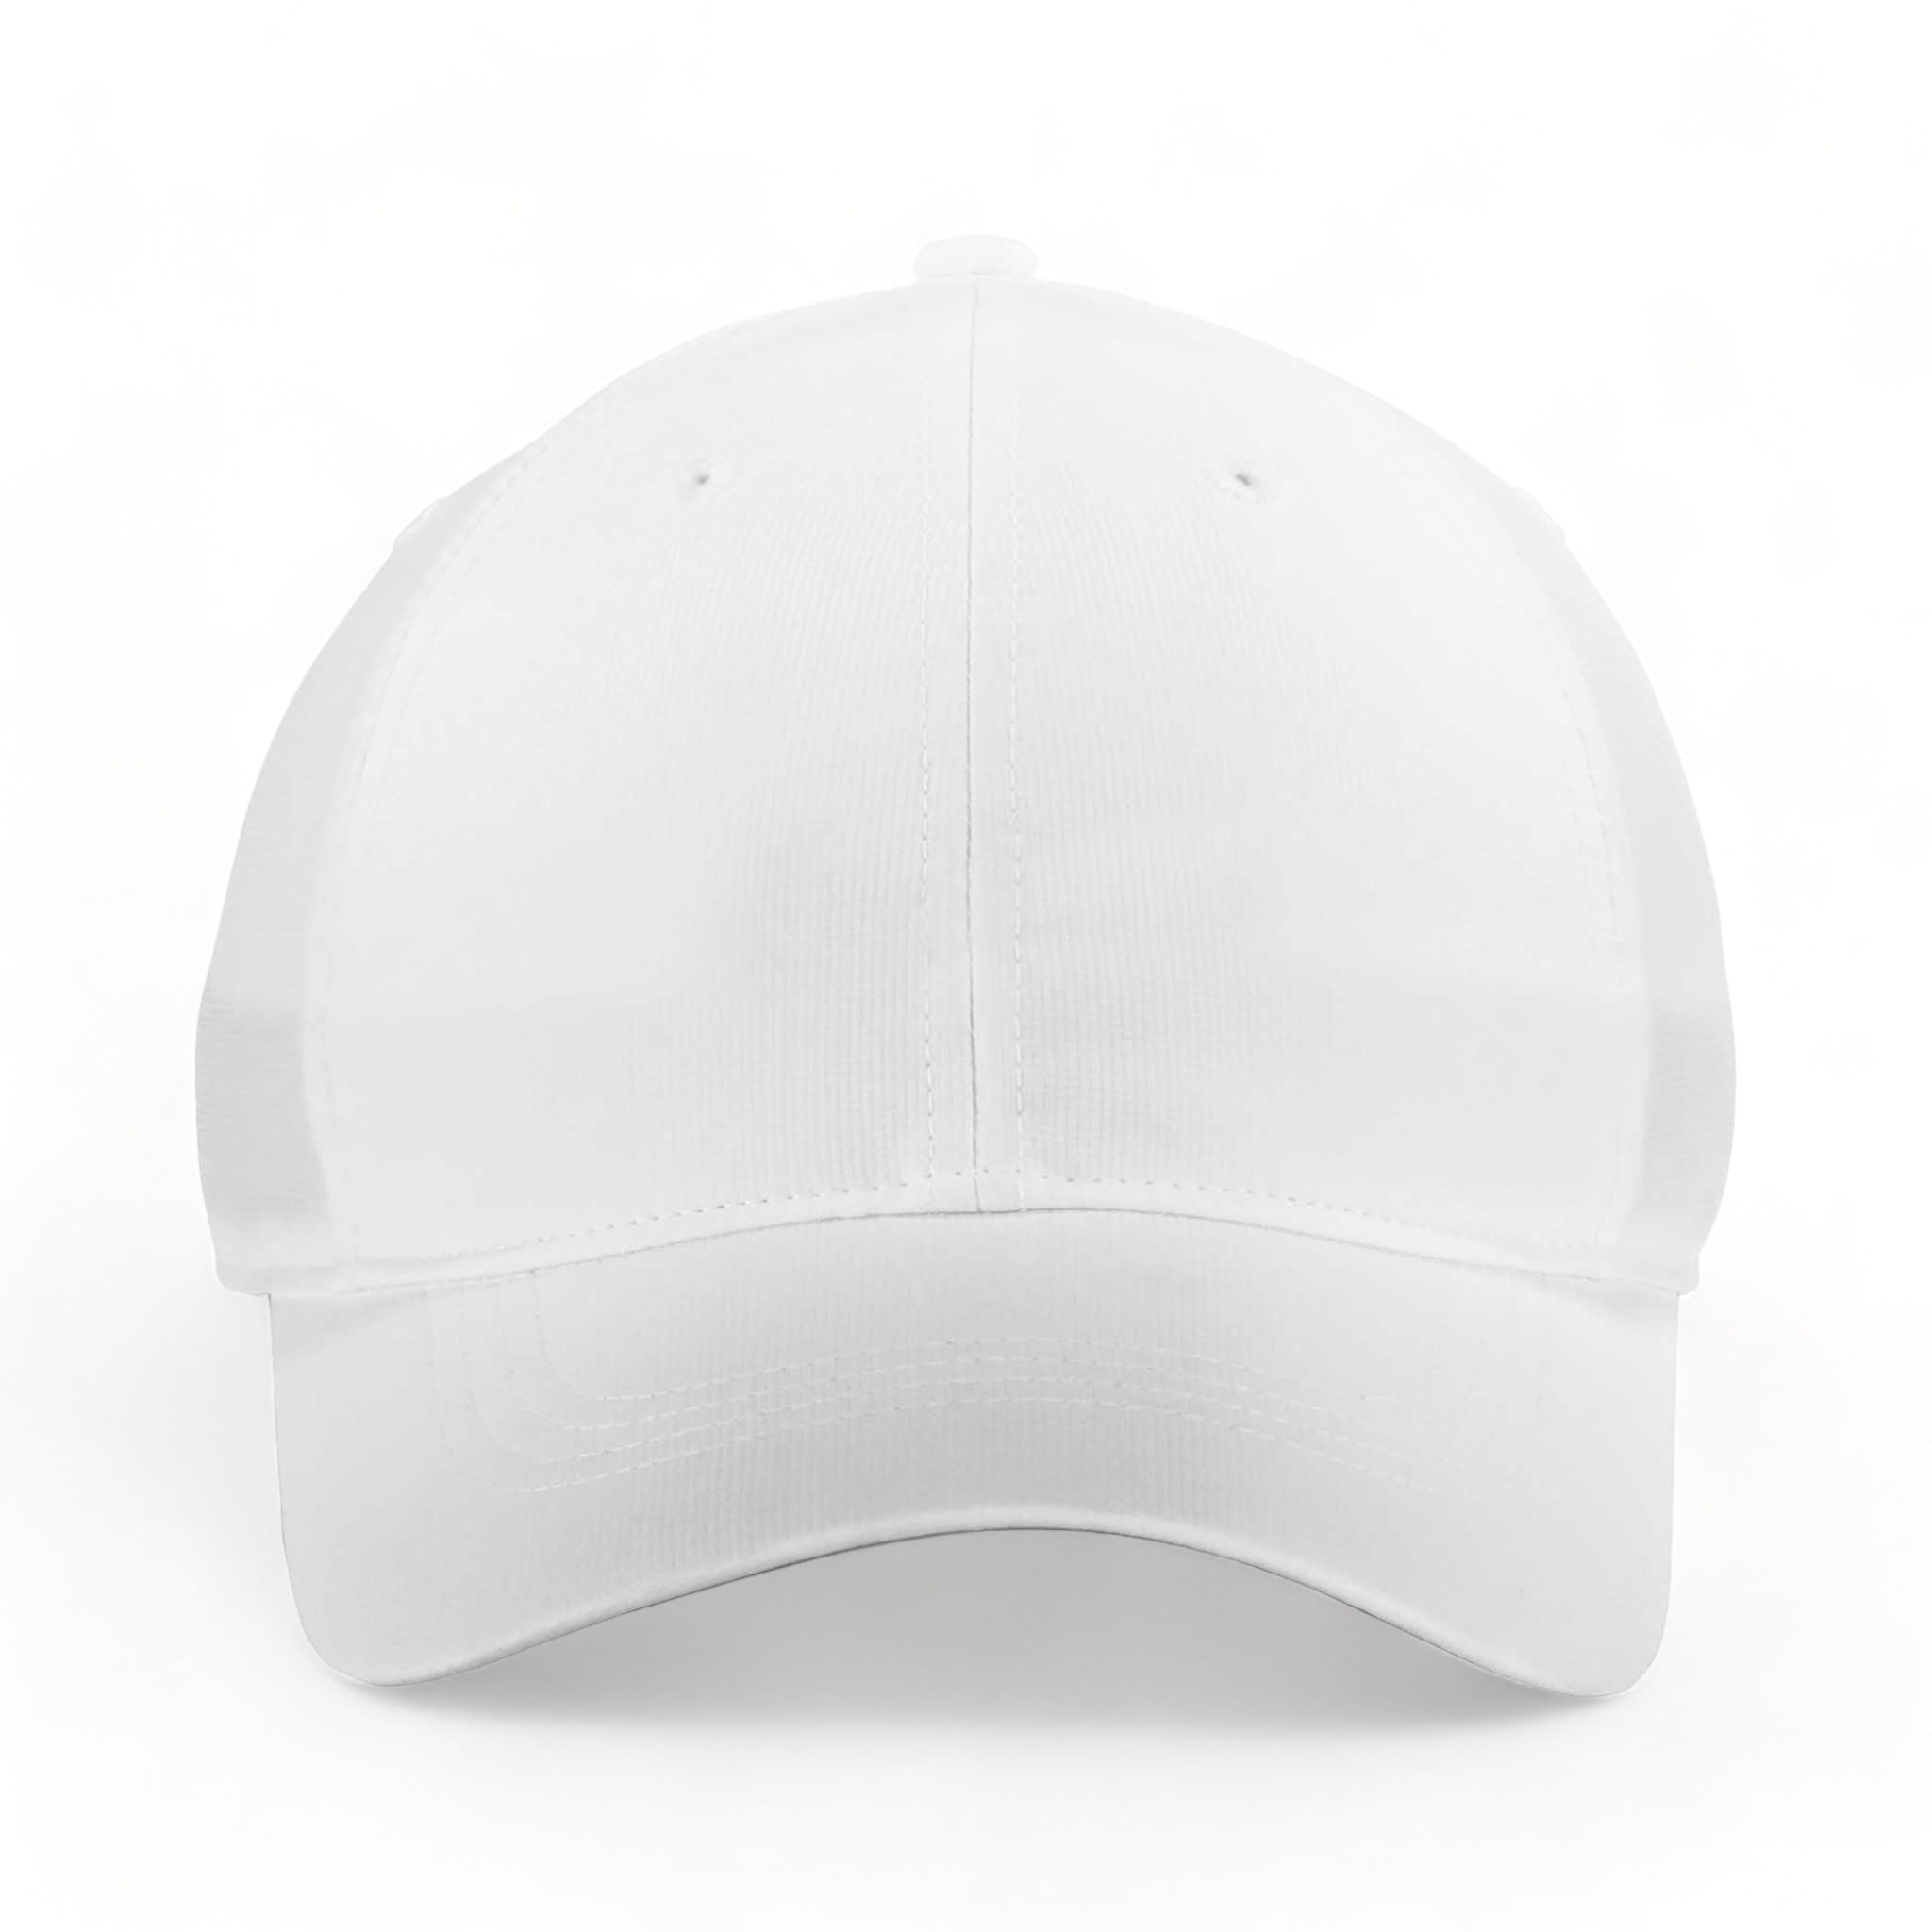 Front view of Nike NKFB6444 custom hat in white